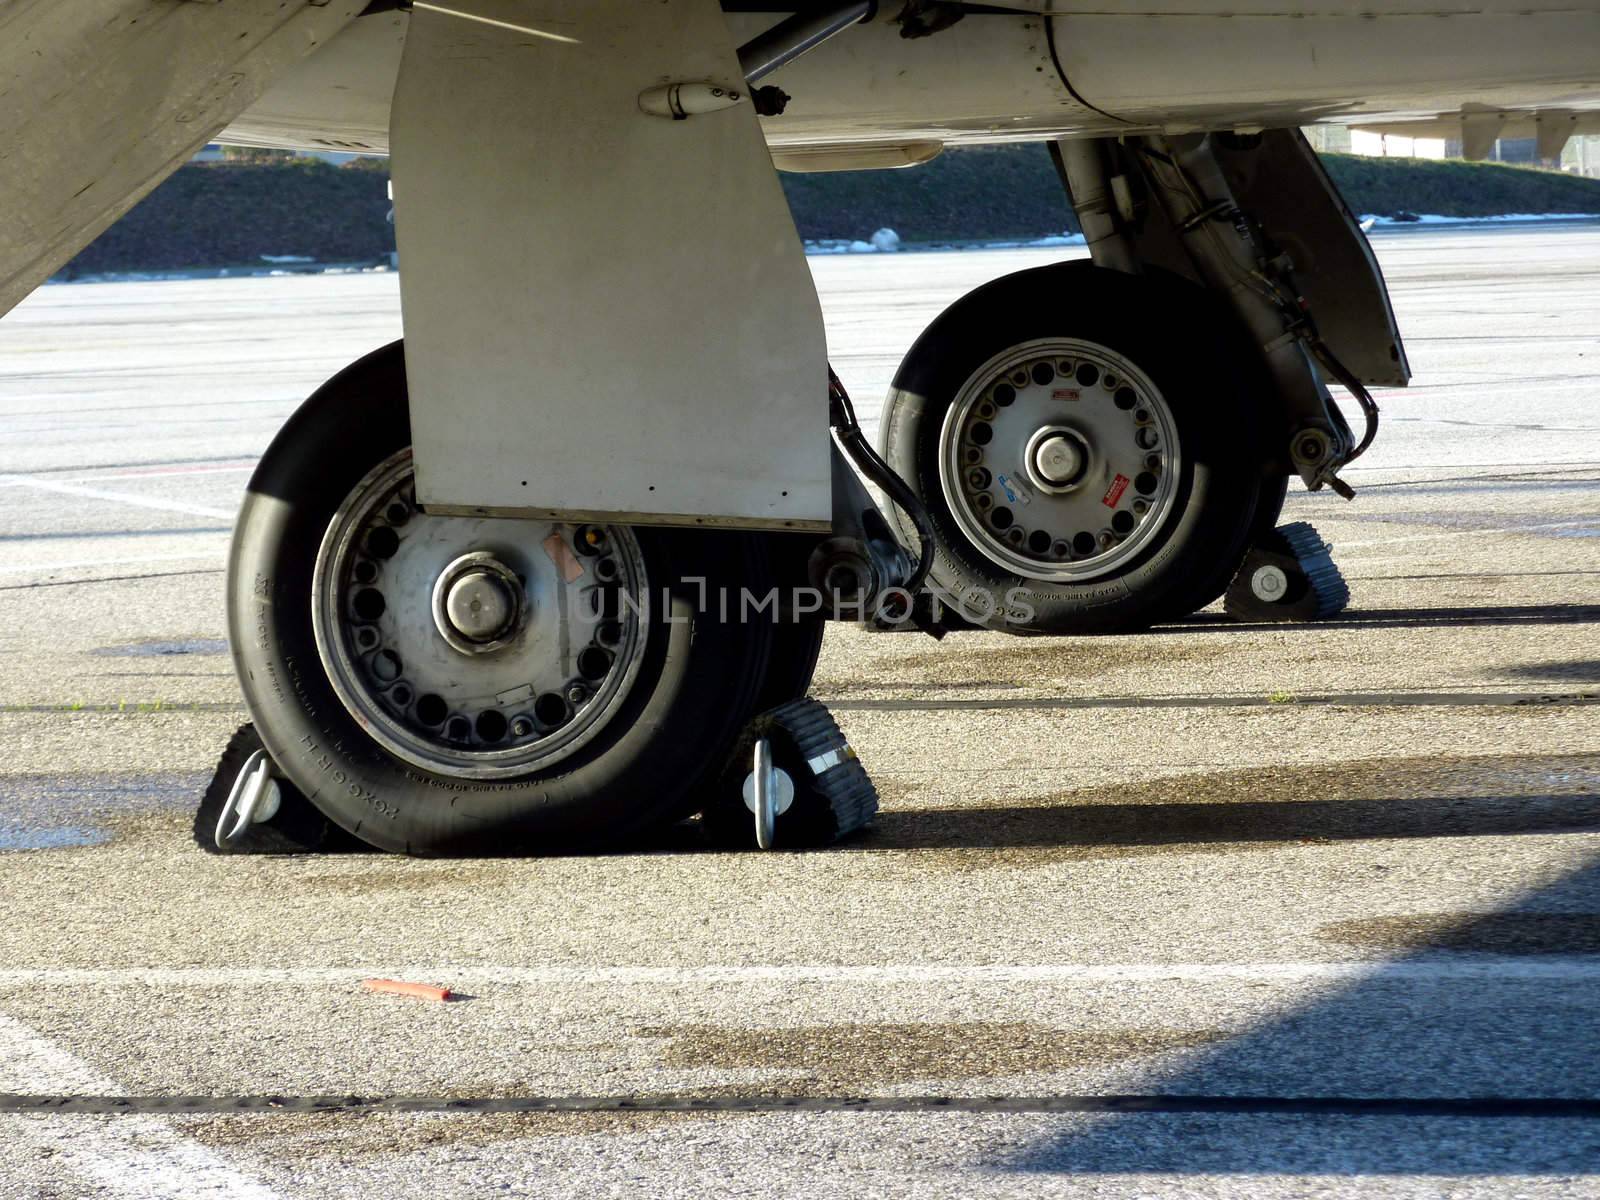 Wheels of a small airplane by Elenaphotos21